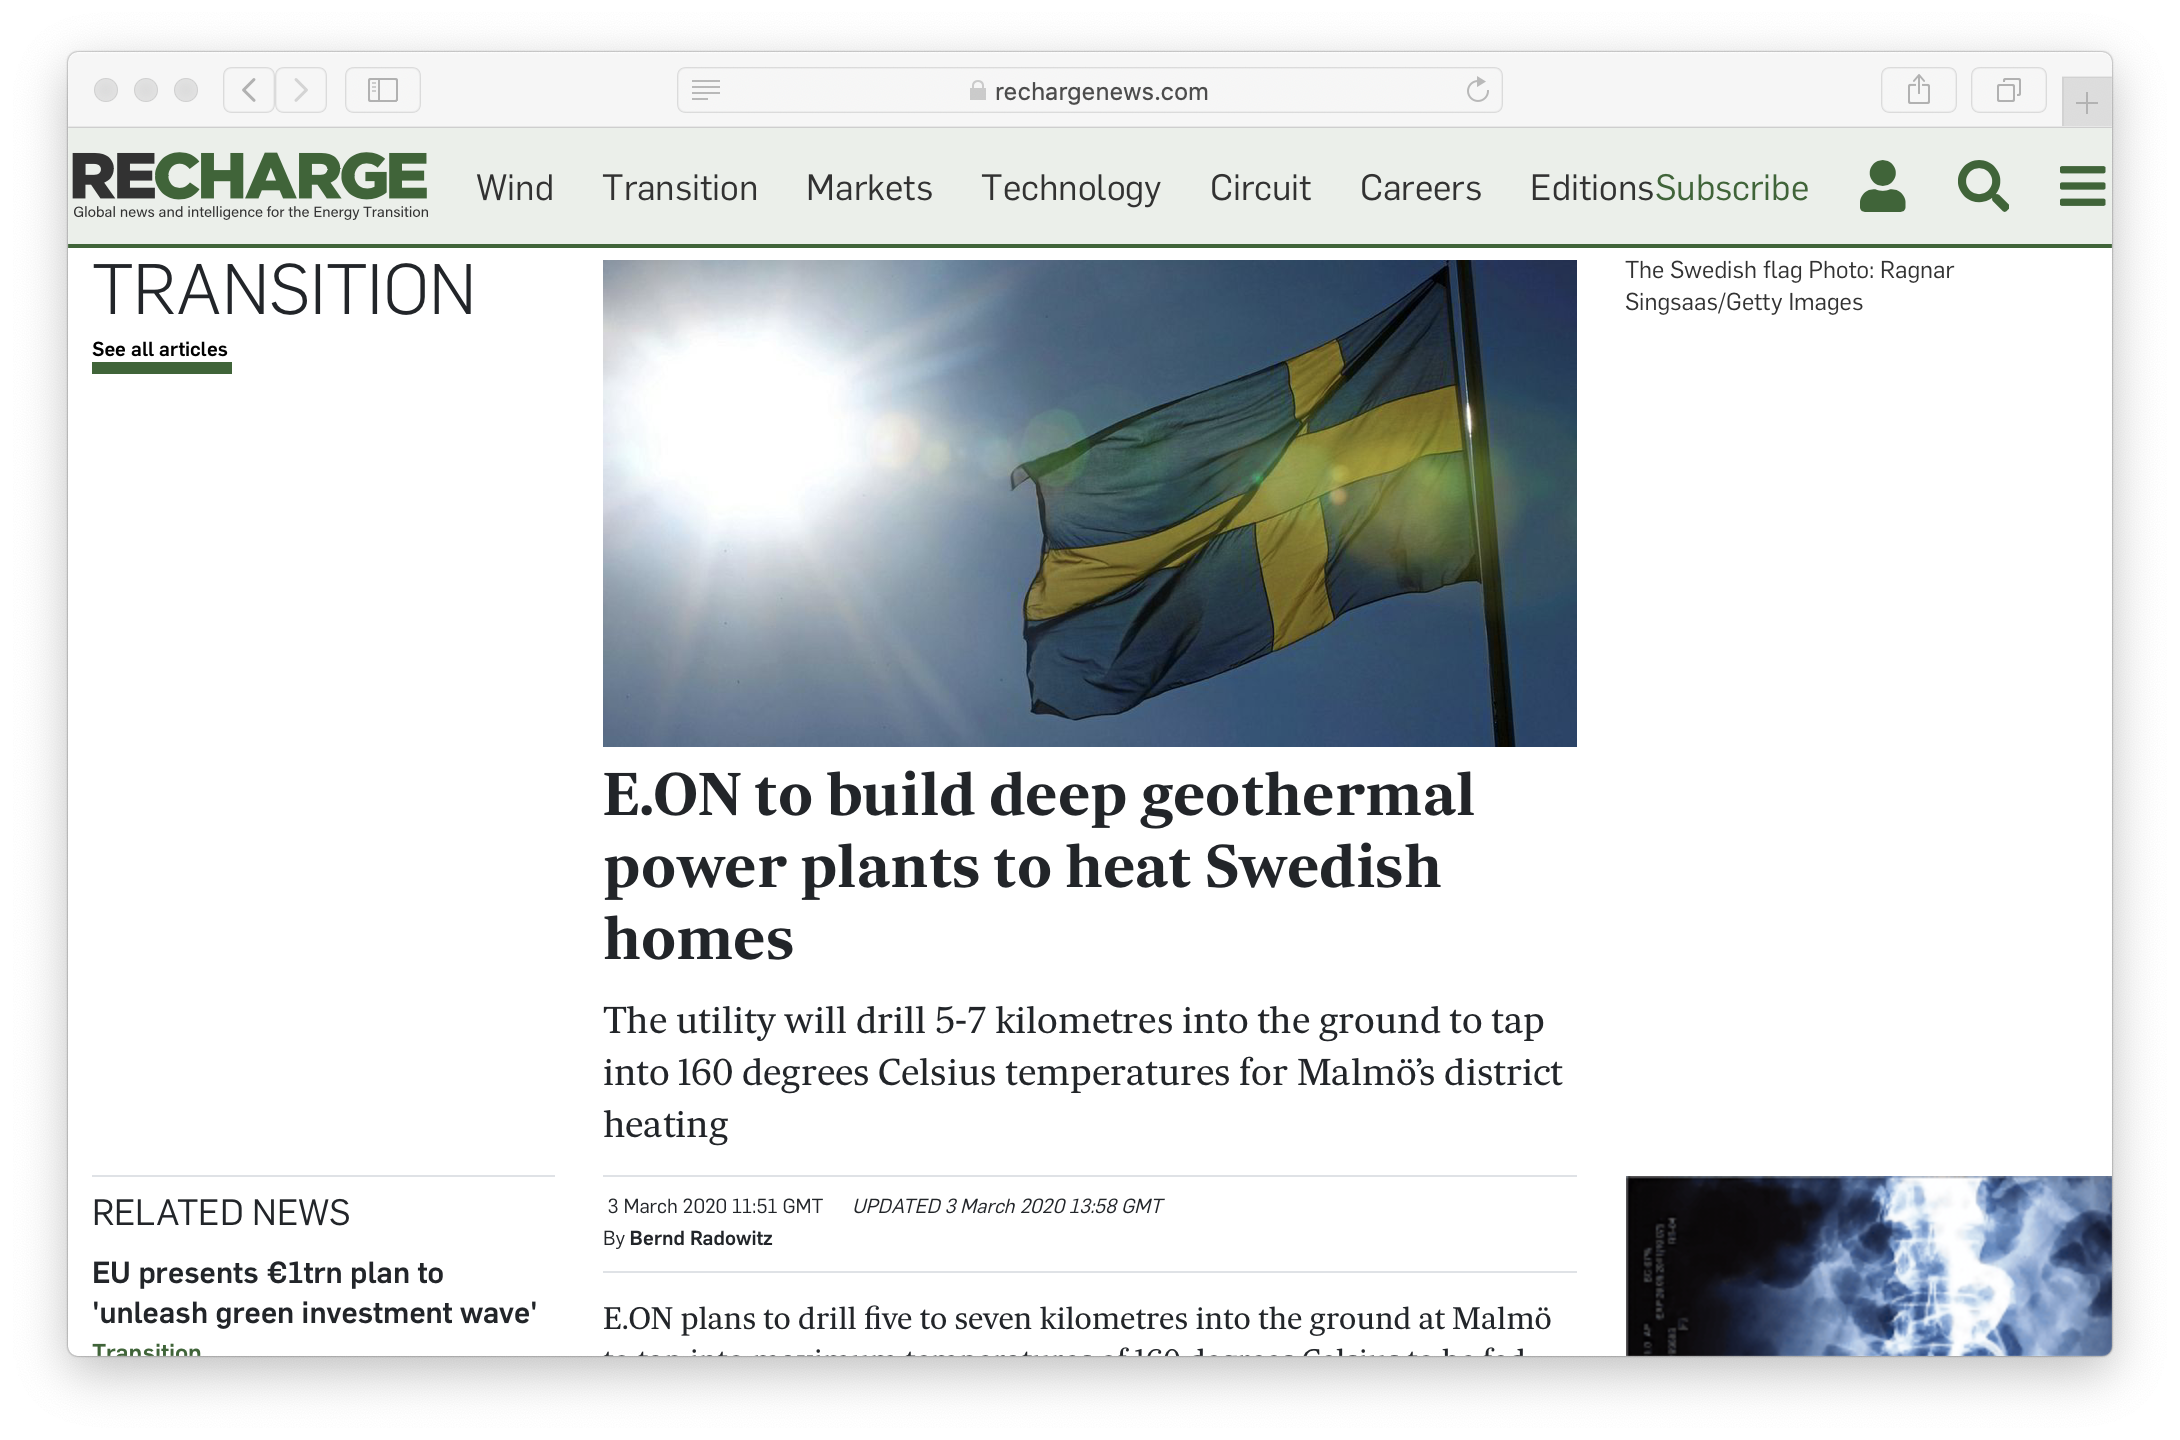 RECHARGE news on geothermal project by E.ON in Sweden, March 2020 (source: screenshot) 